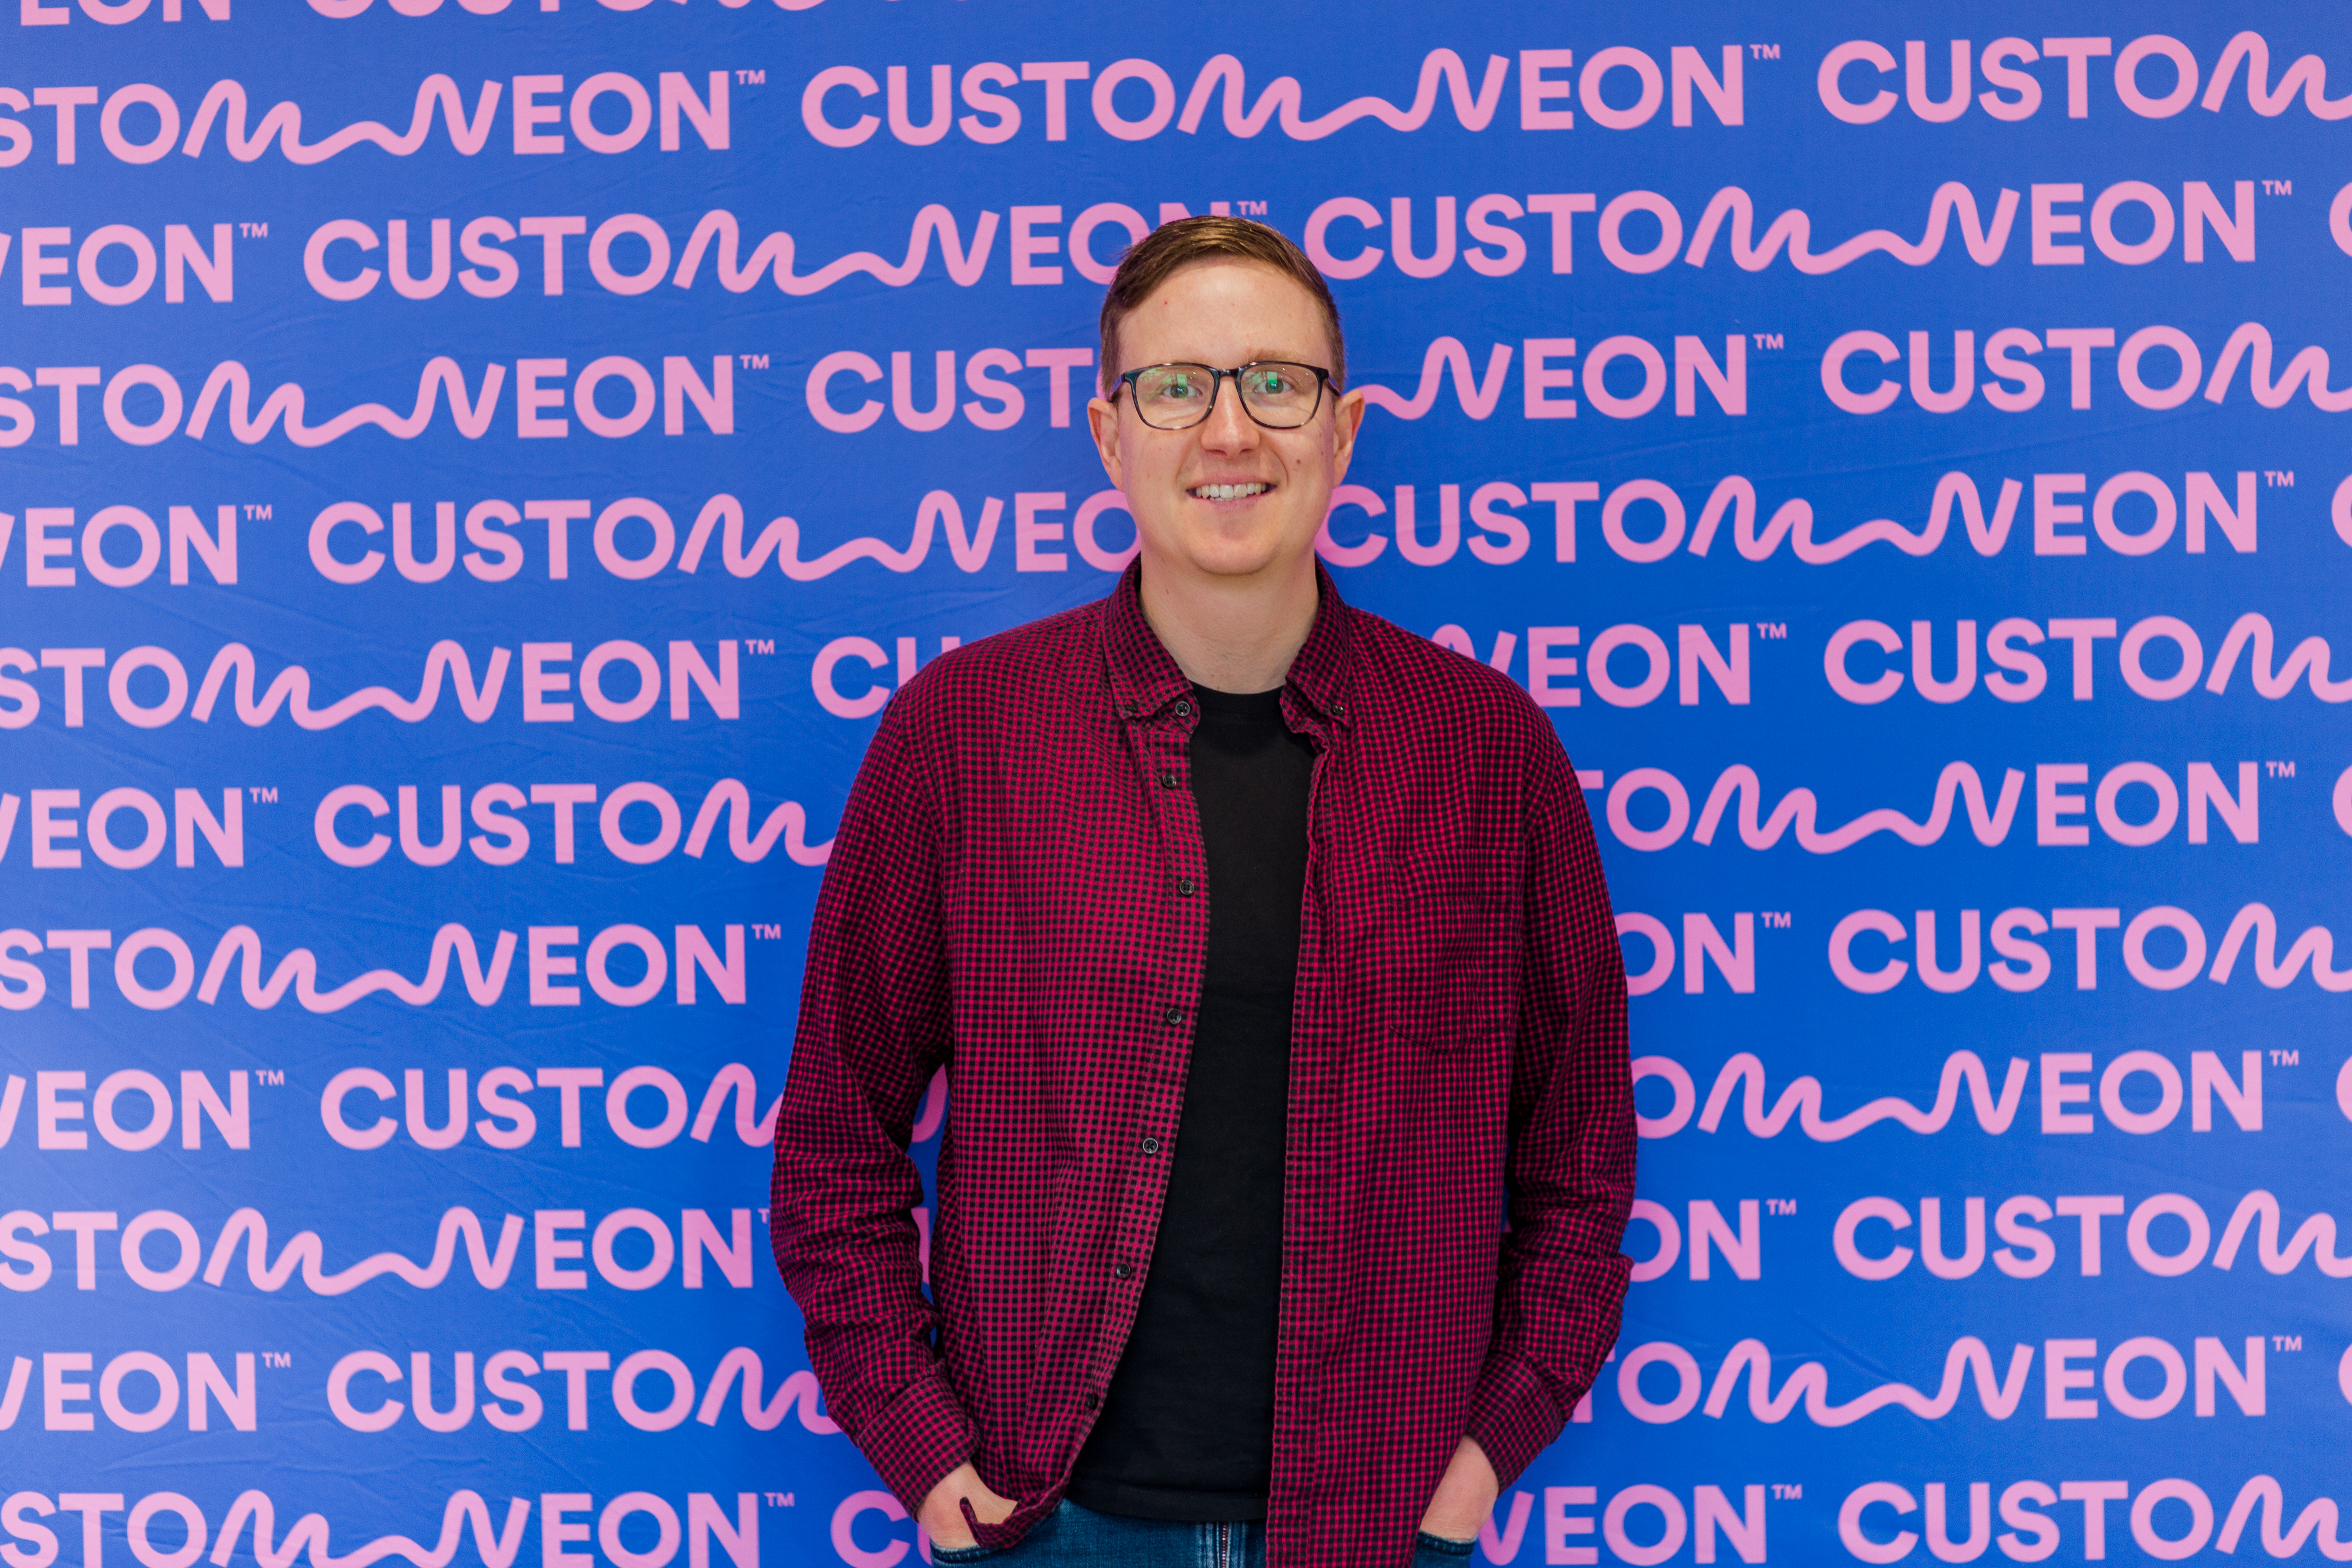 James Mercurio, Commercial sales and marketing manager of Custom Neon